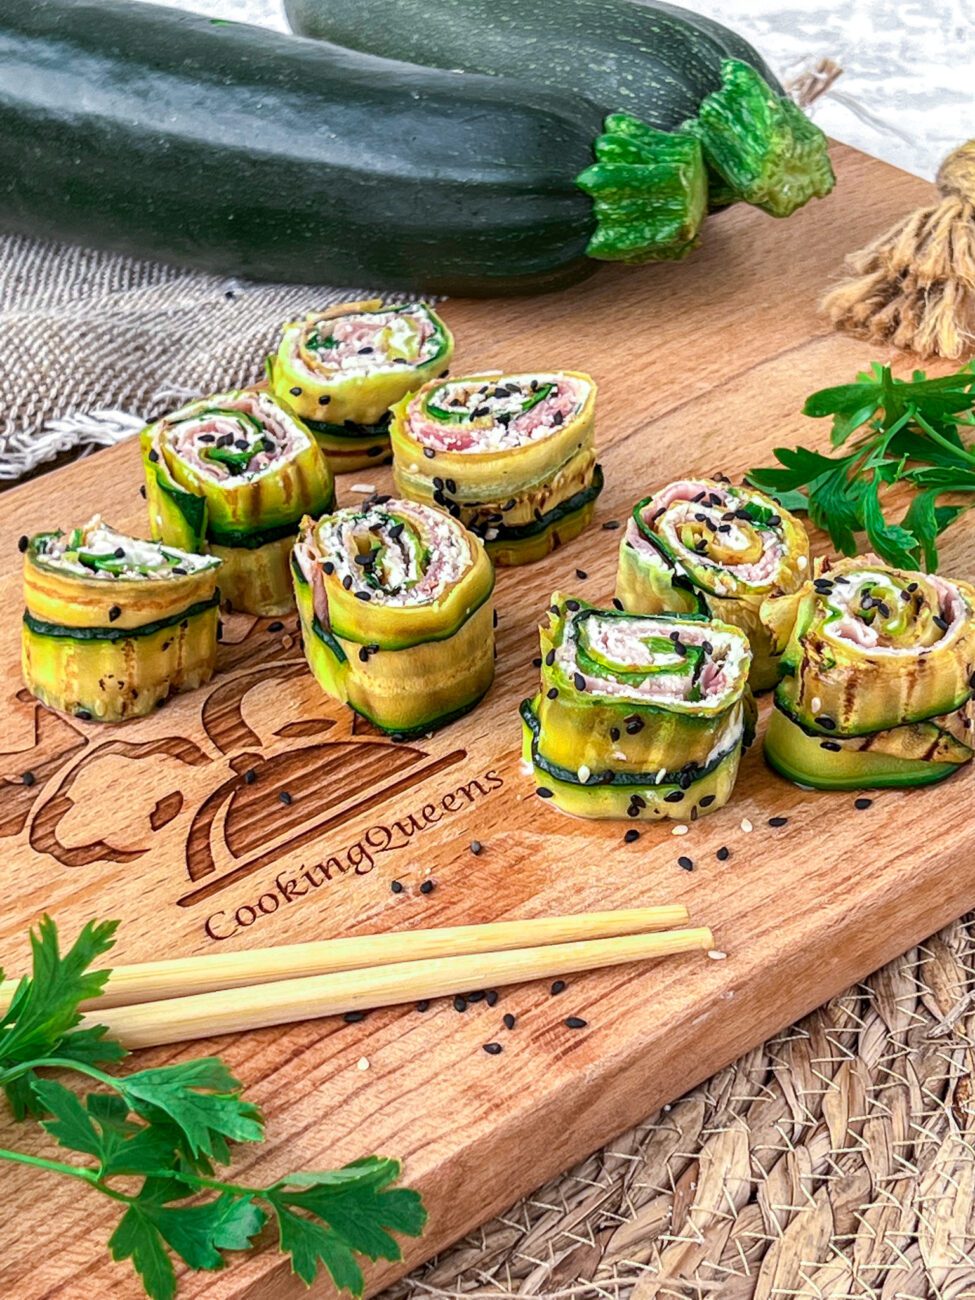 Courgette sushi